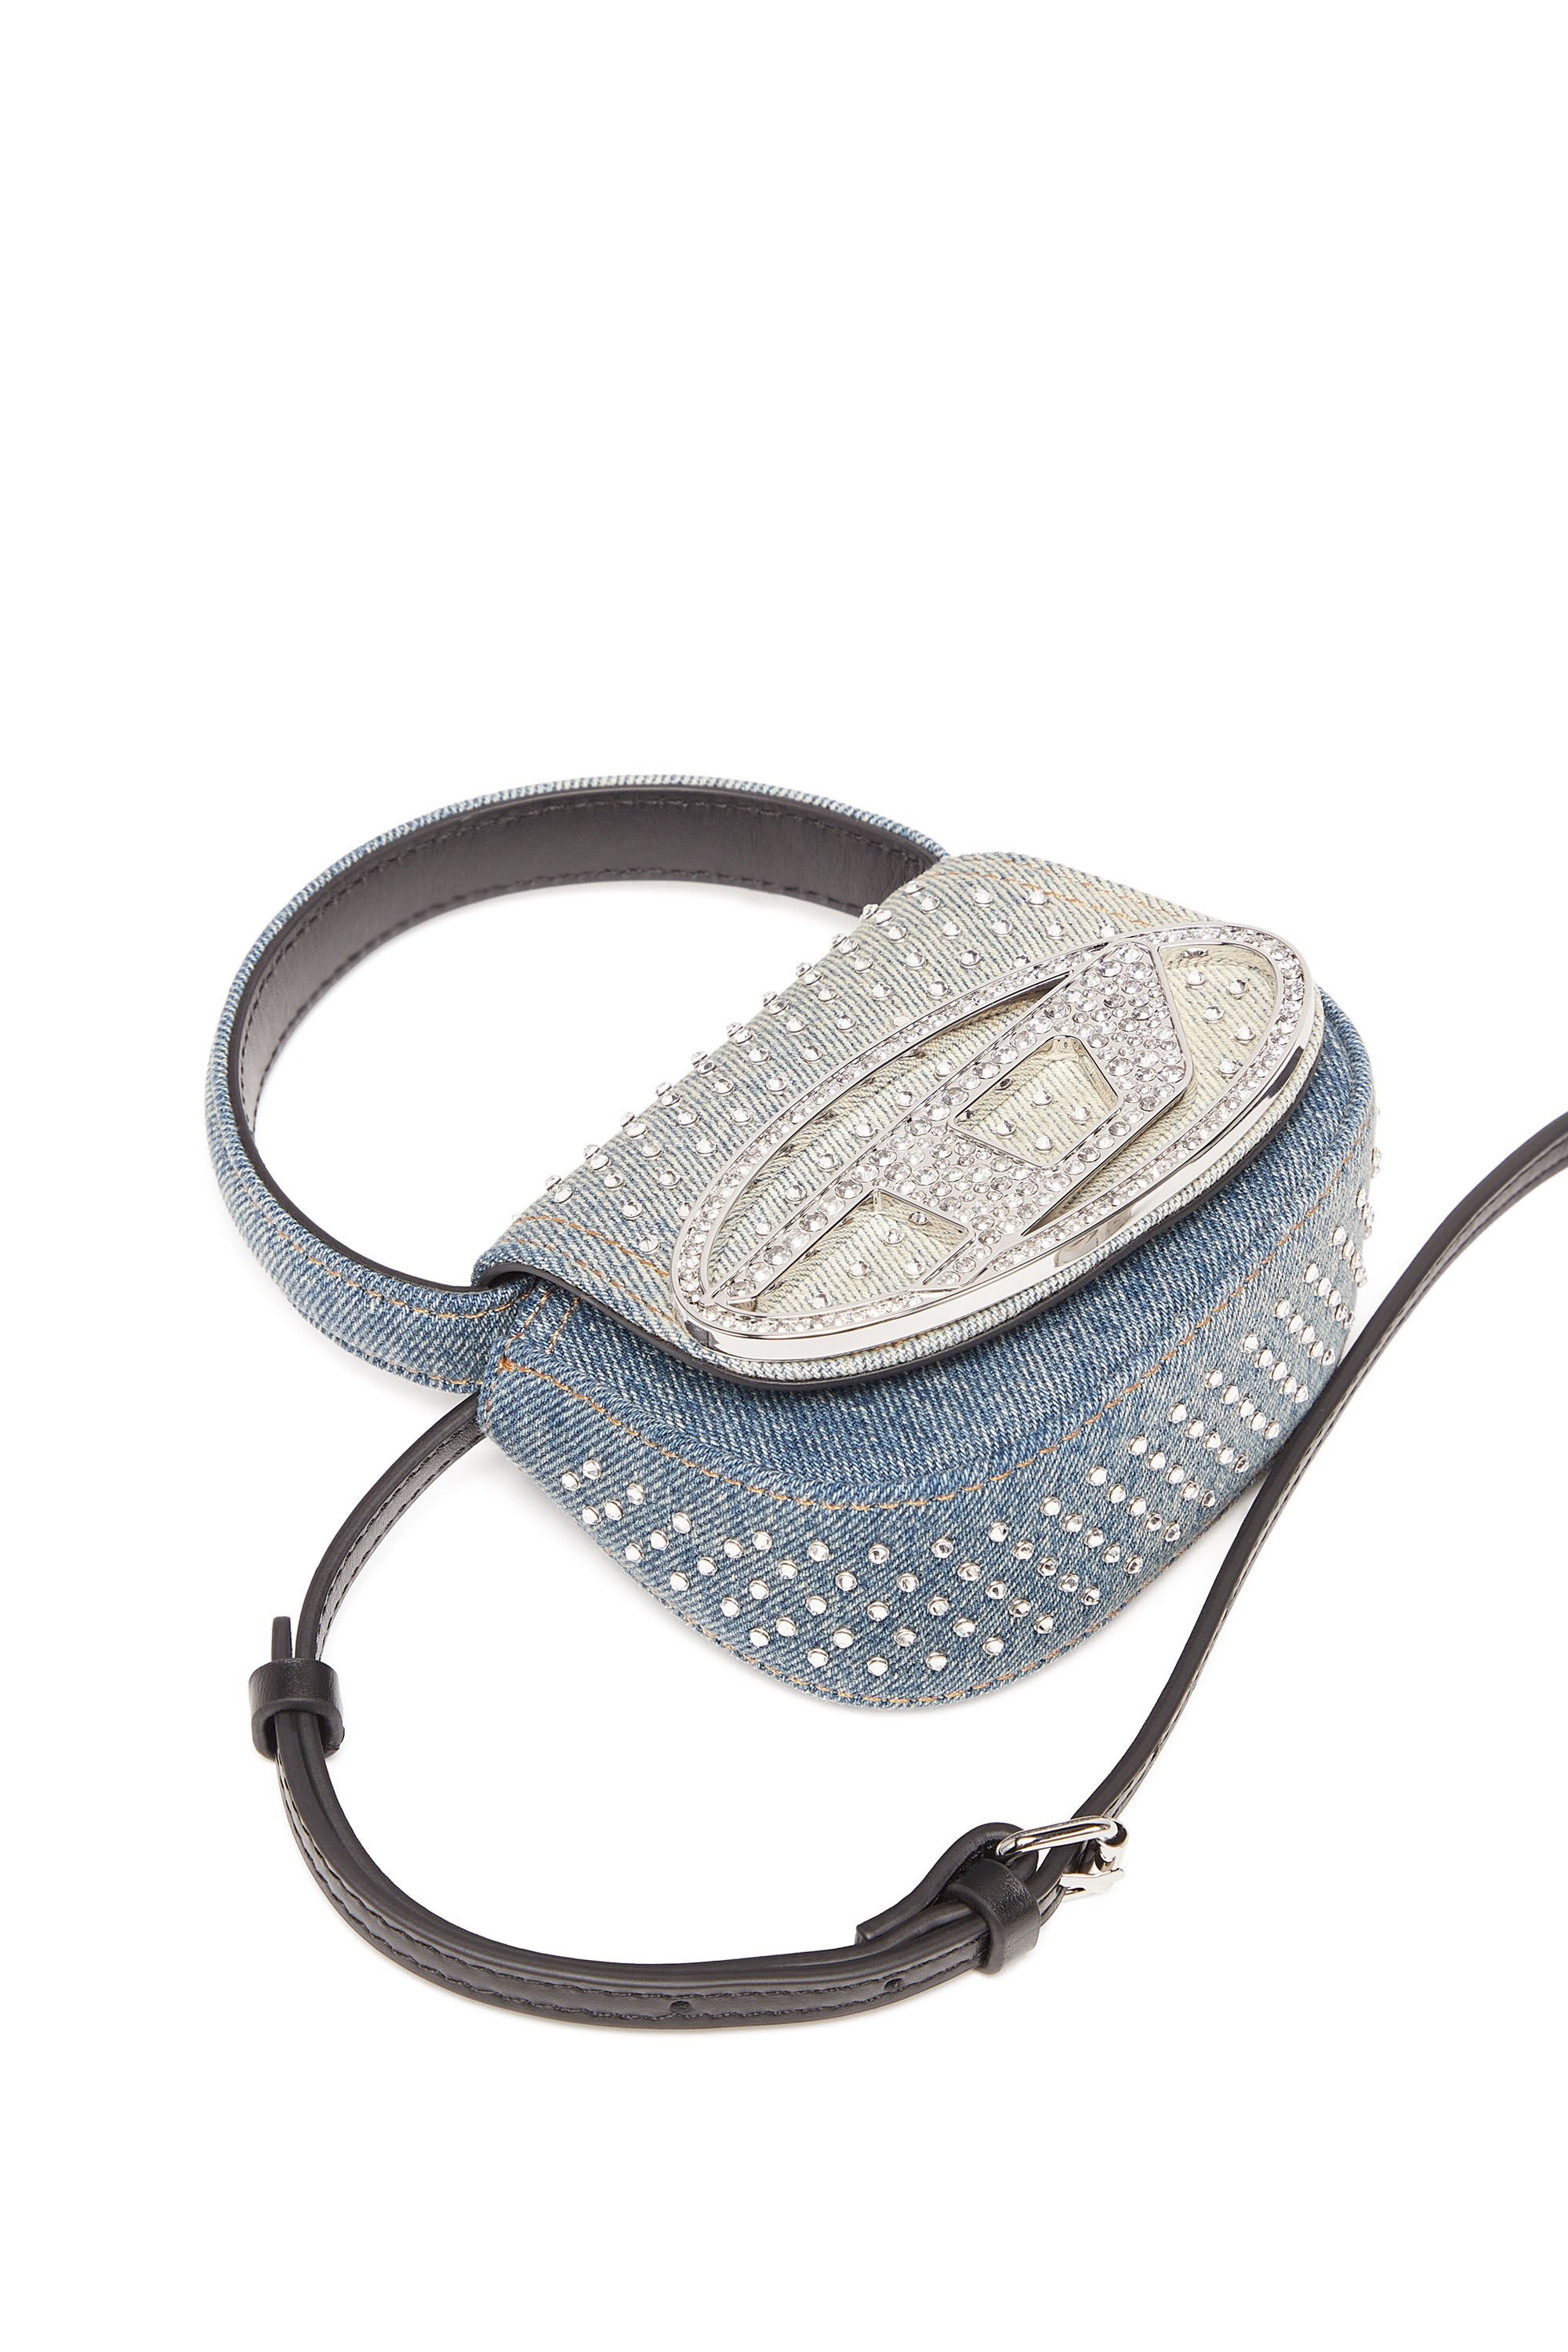 Women's 1DR XS - Iconic mini bag in denim and crystals | 1DR XS Diesel